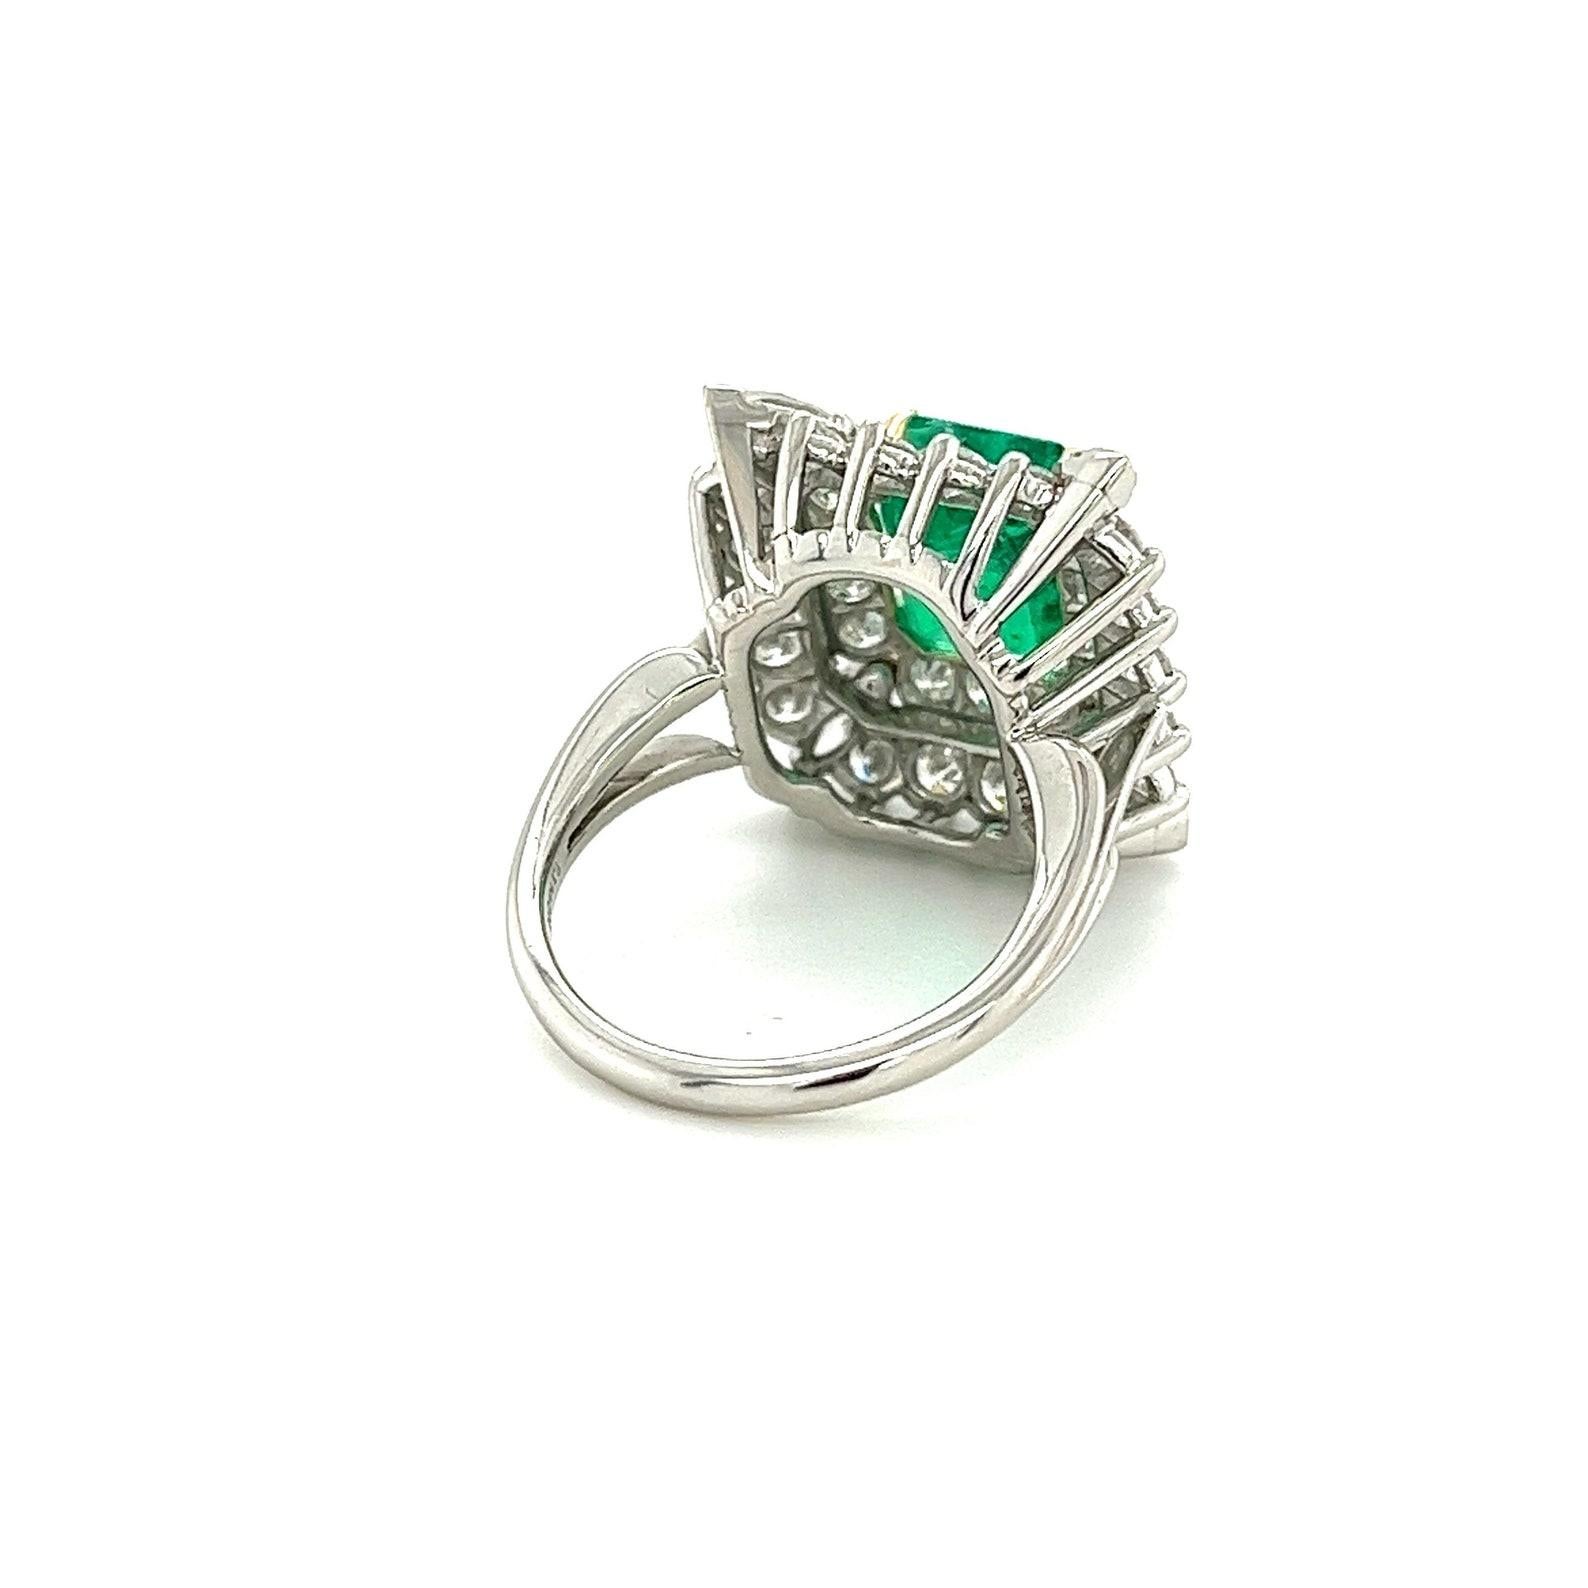 3.31 Carat Colombian Emerald & Diamond Halo Cocktail Ring in Platinum Setting For Sale 2